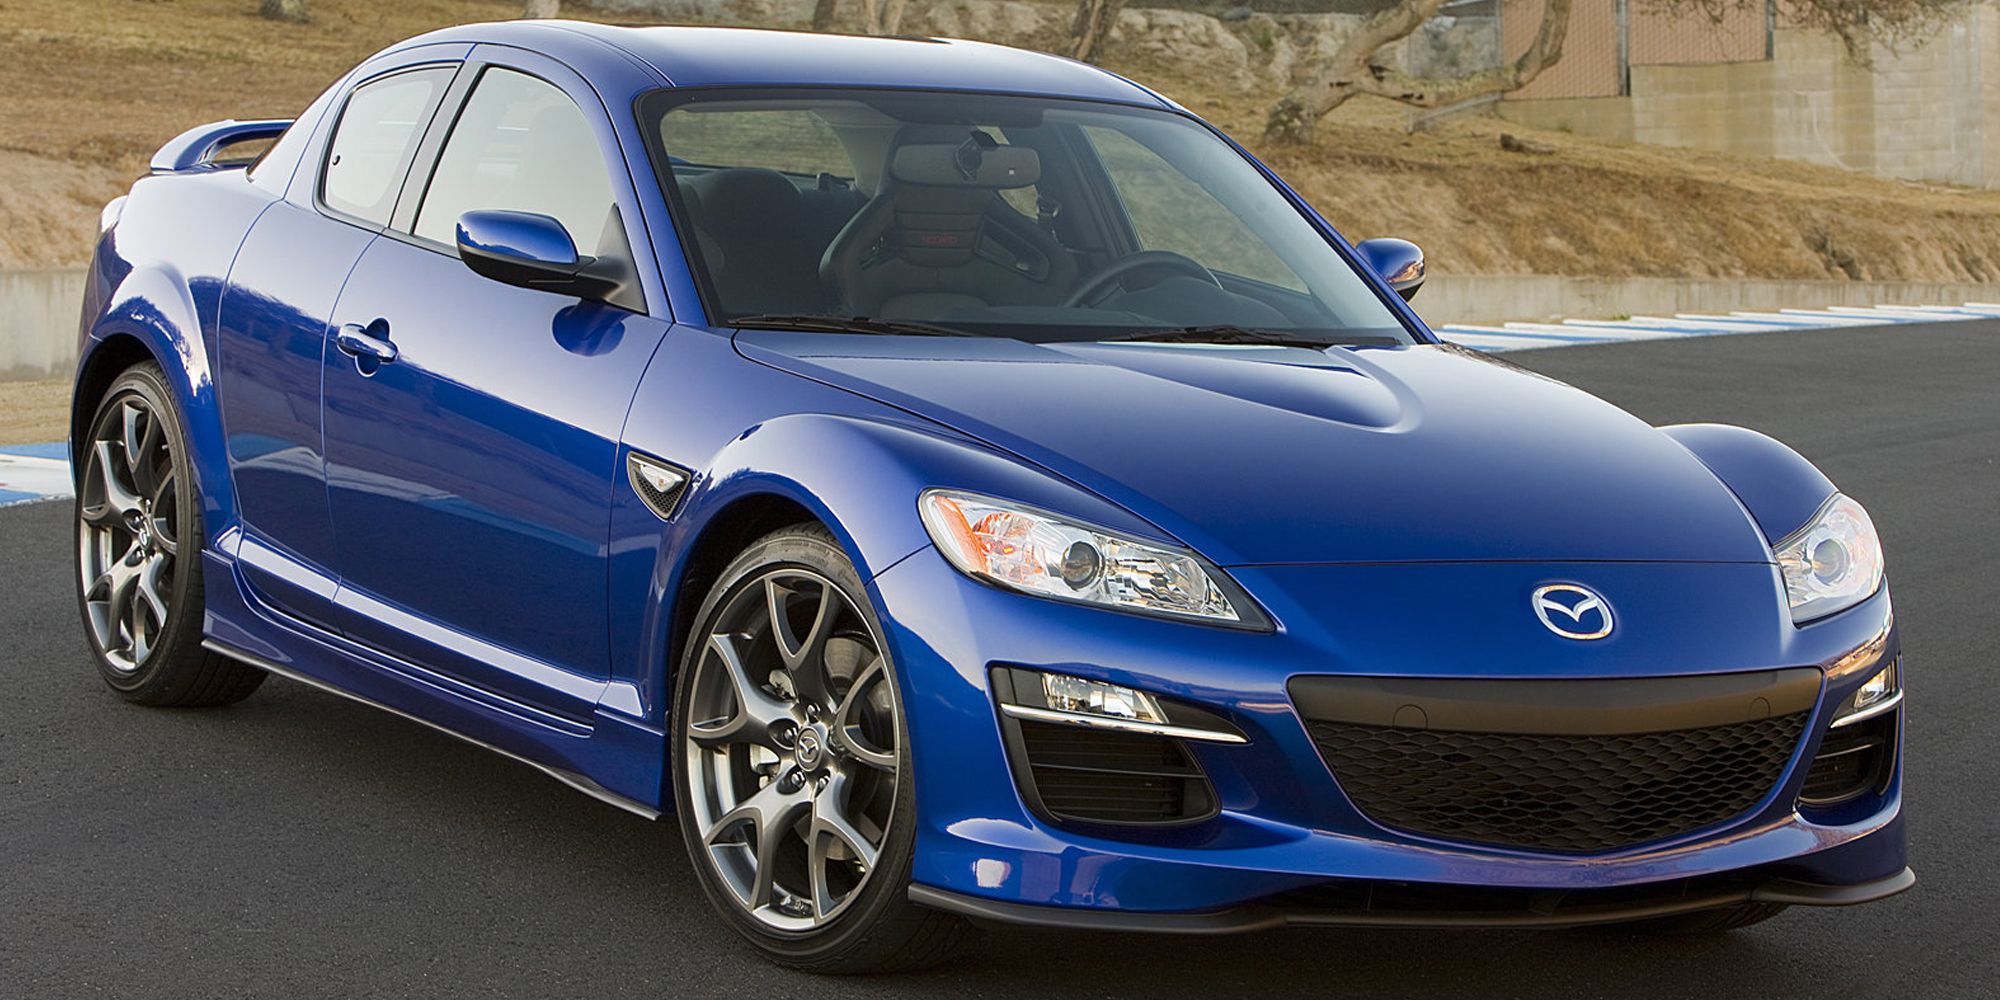 Front 3/4 view of a blue RX-8 